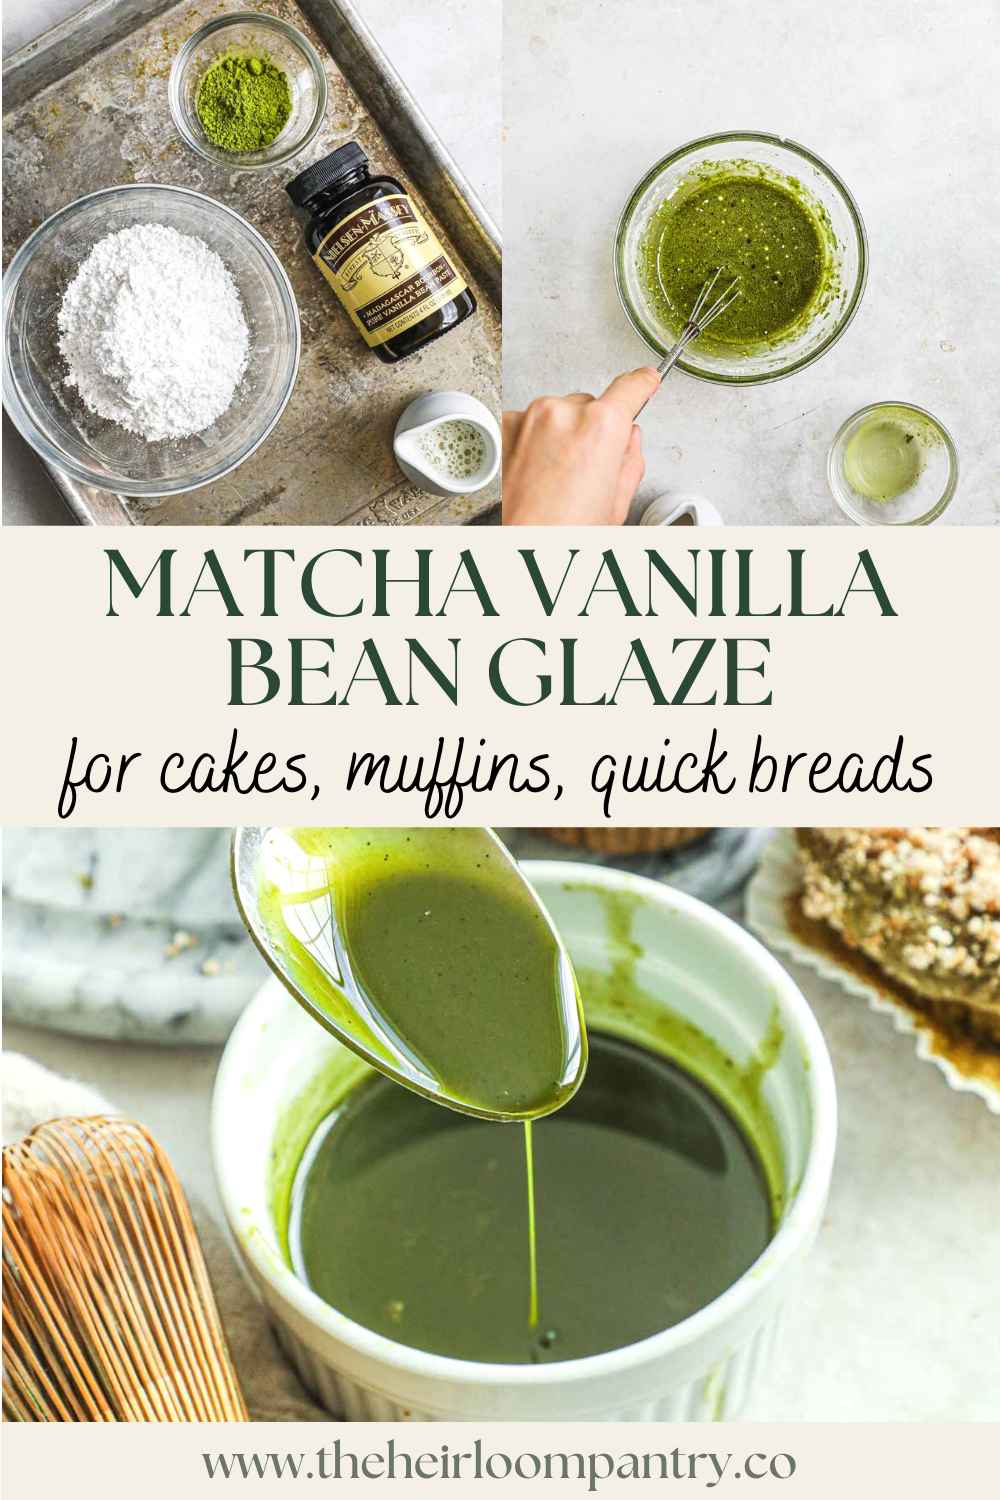 Matcha vanilla bean glaze for cakes, muffins, scones, quick breads, and more Pinterest pin.